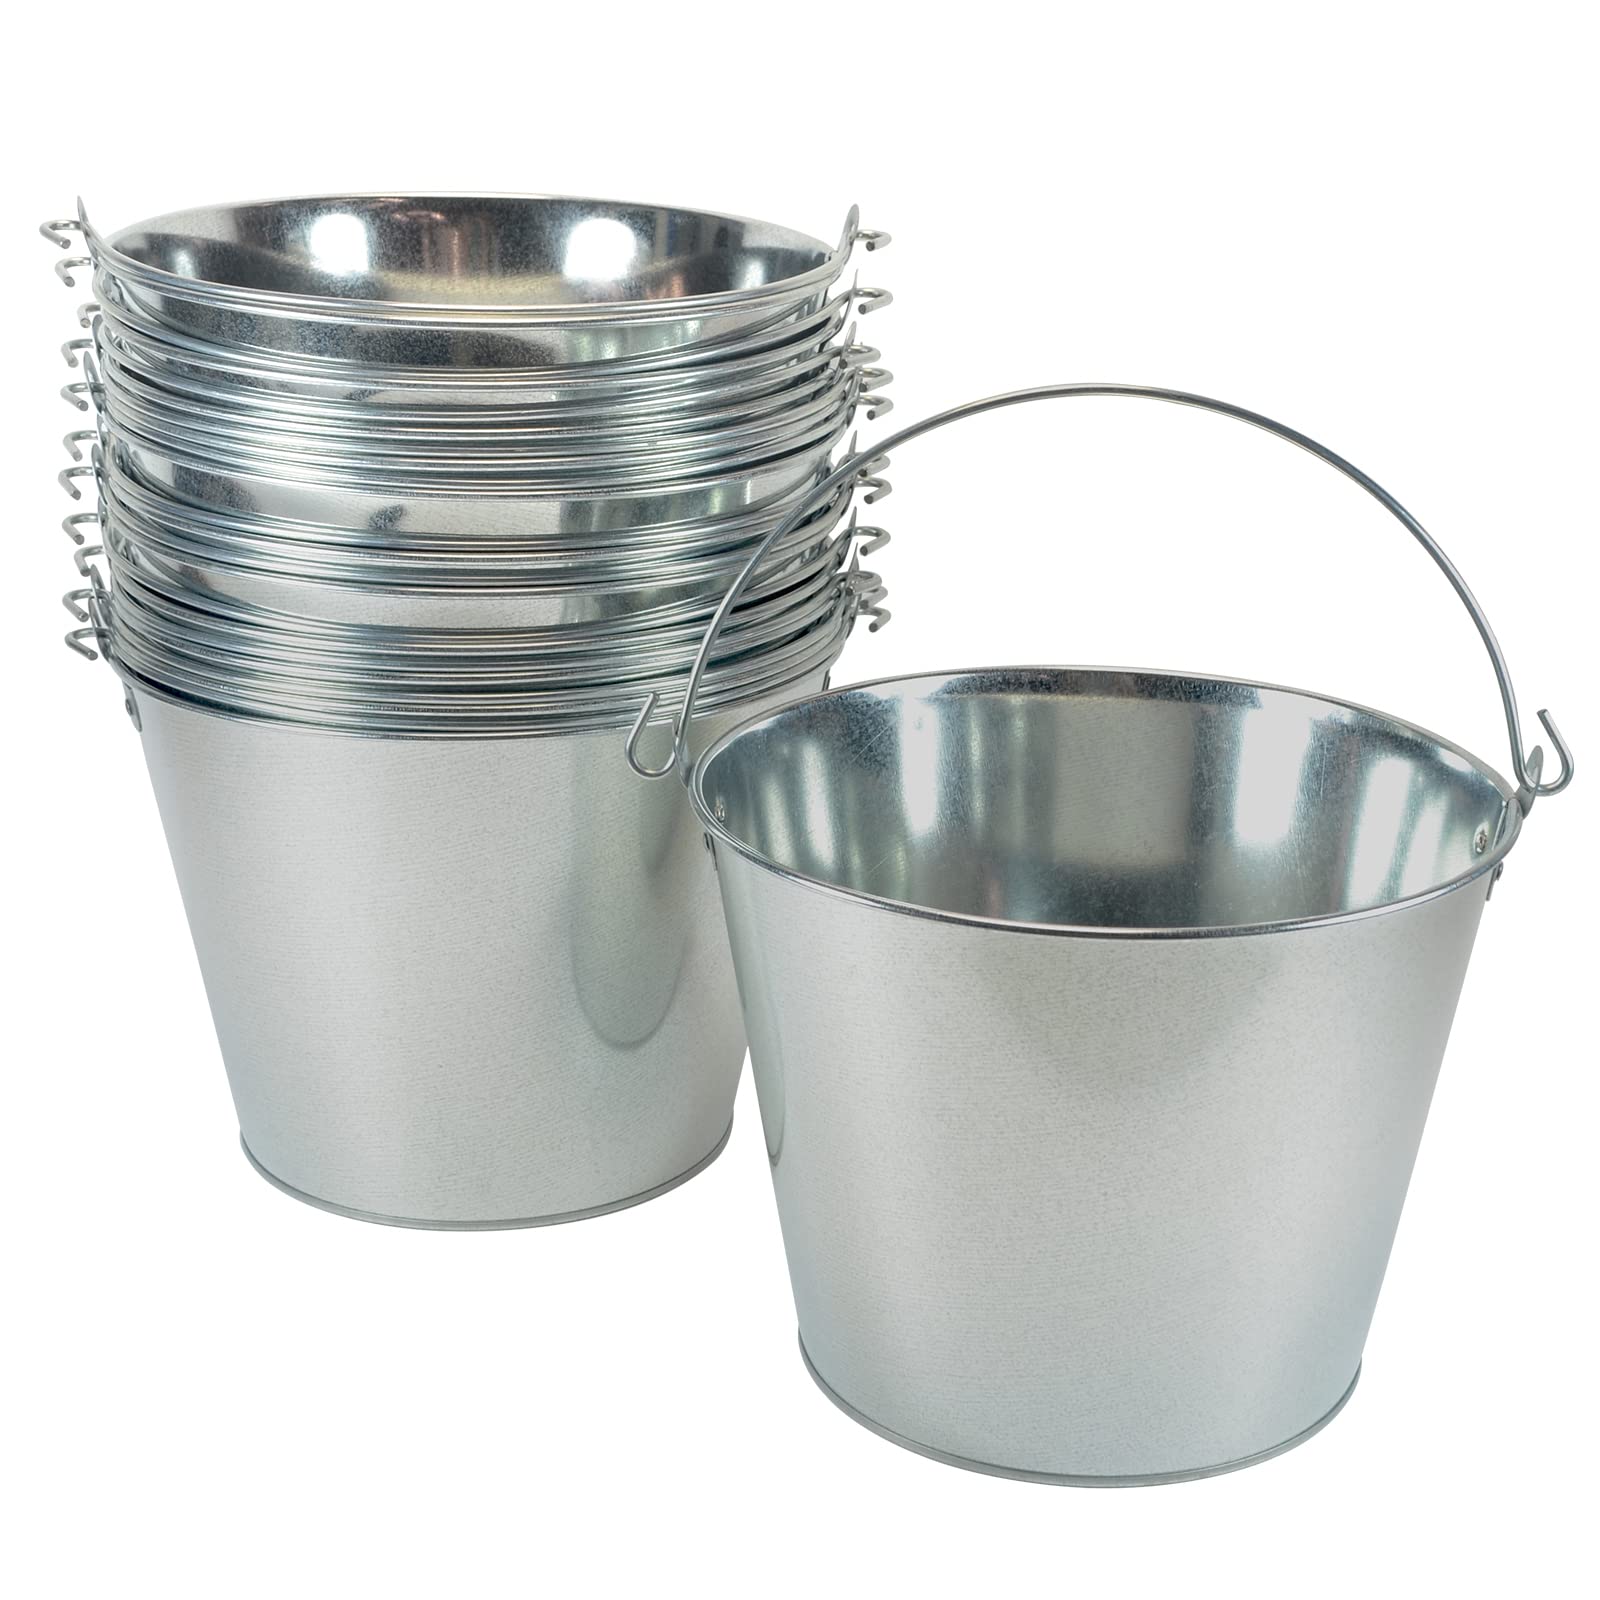 5-Quart Galvanized Pail Beer Bucket 9x9x7 inches (Pack of 12)